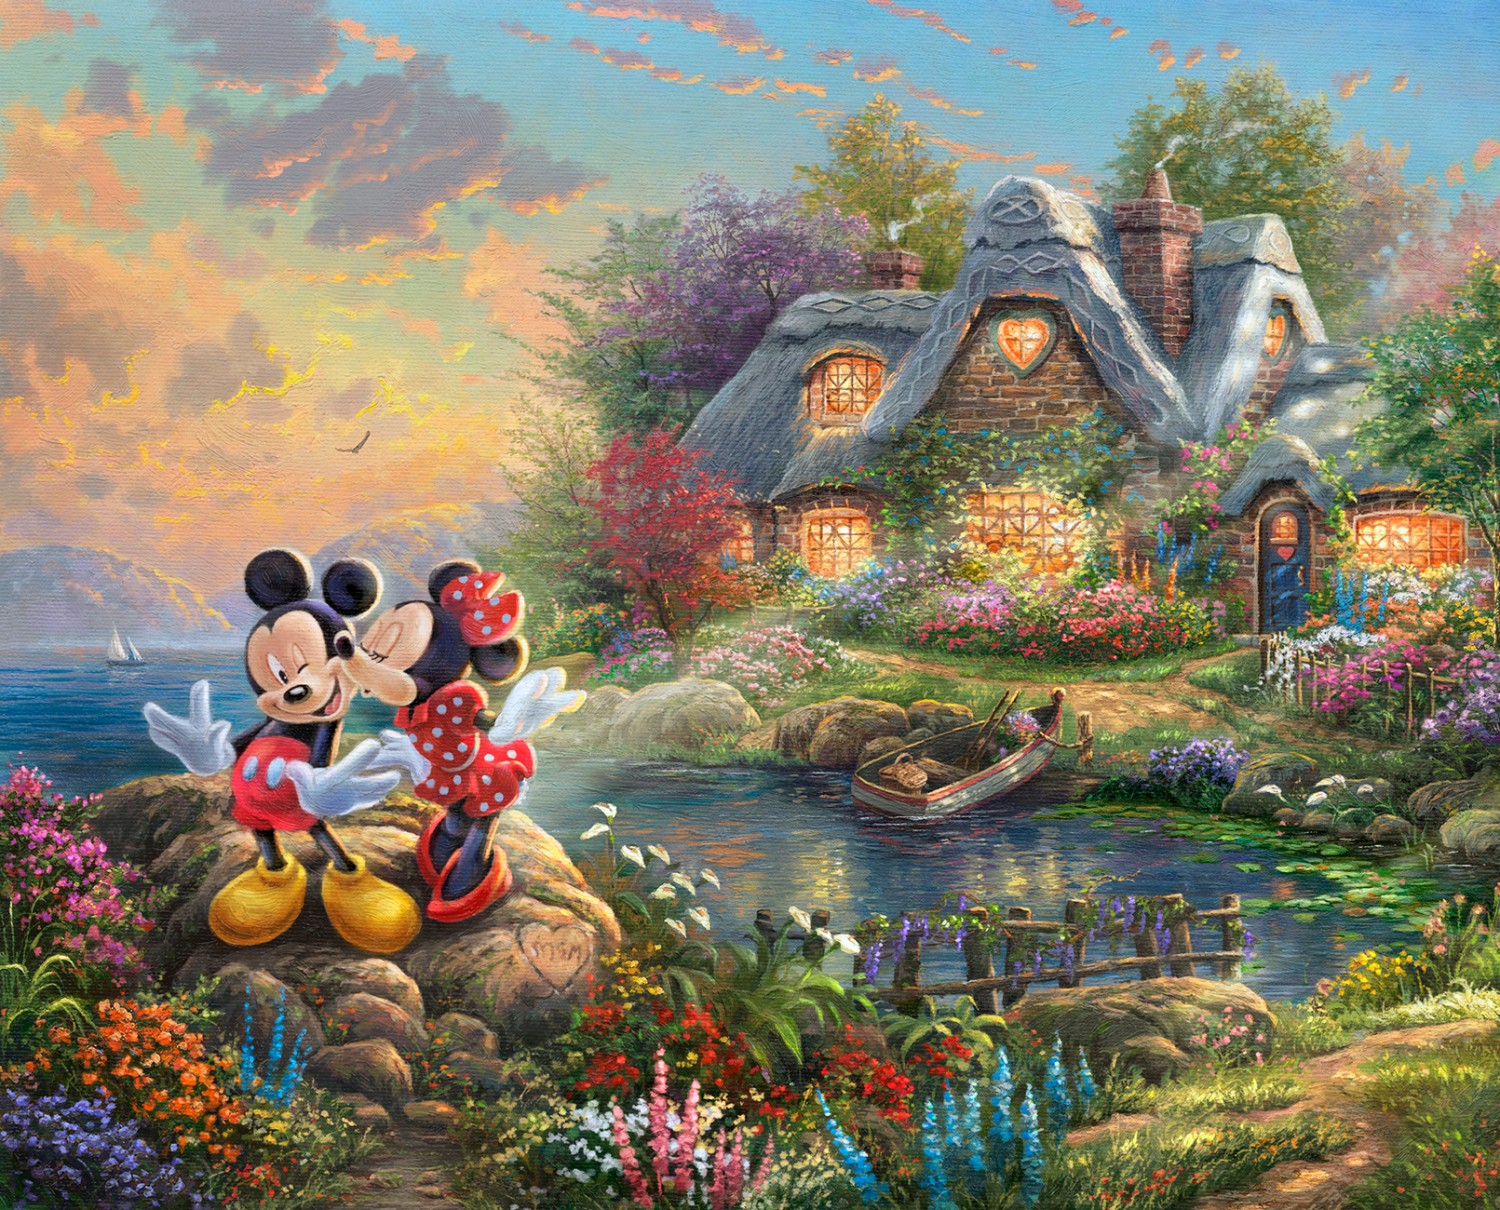 Disney Dreams Mickey and Minnie Mouse Sweetheart Cove Panel